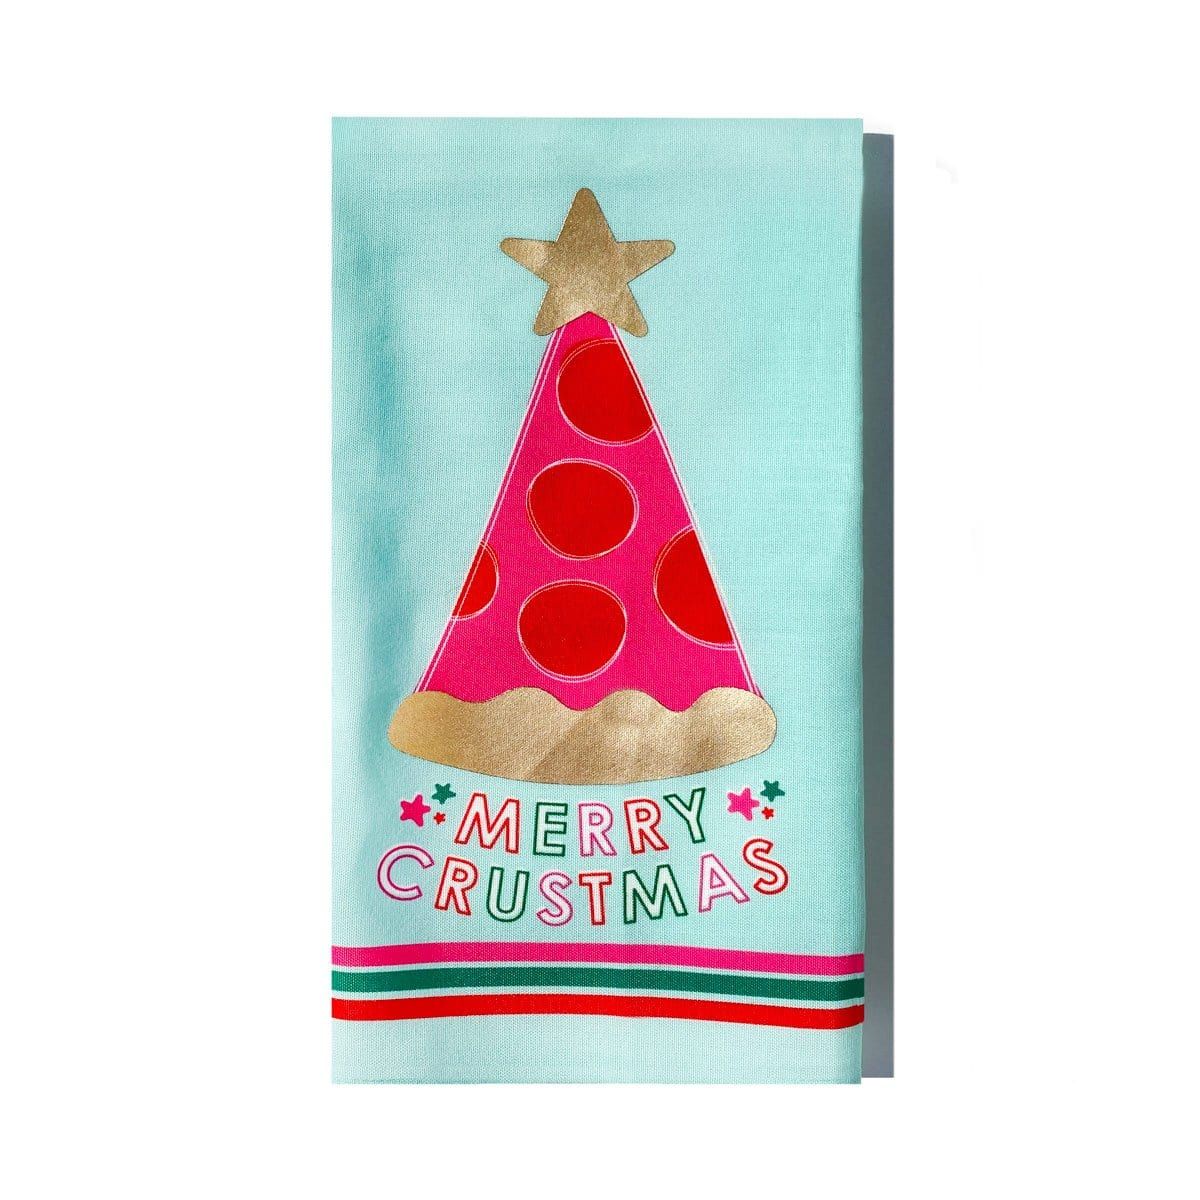 Merry Crustmas Holiday Tea Towel | Packed Party